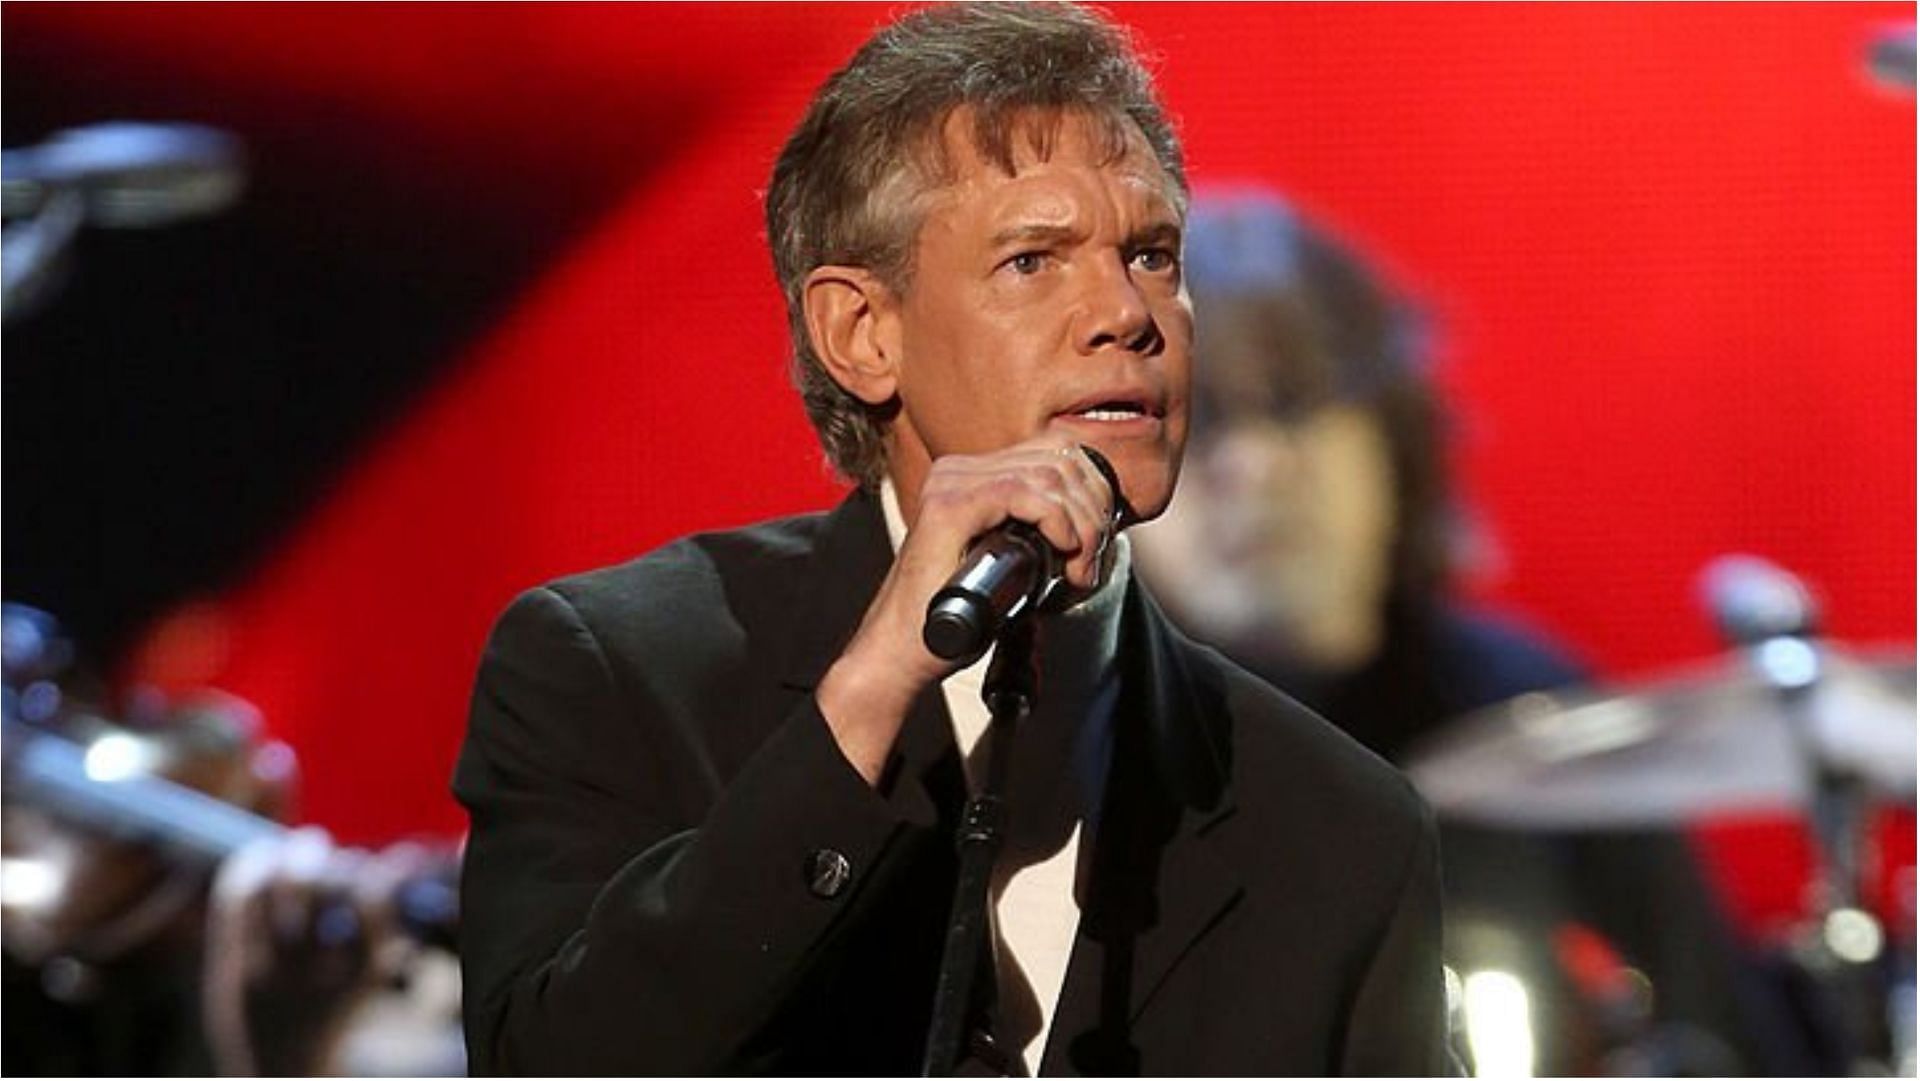 Randy Travis is a singer, songwriter, guitarist, and actor (Image via Frederick M. Brown/Getty Images)